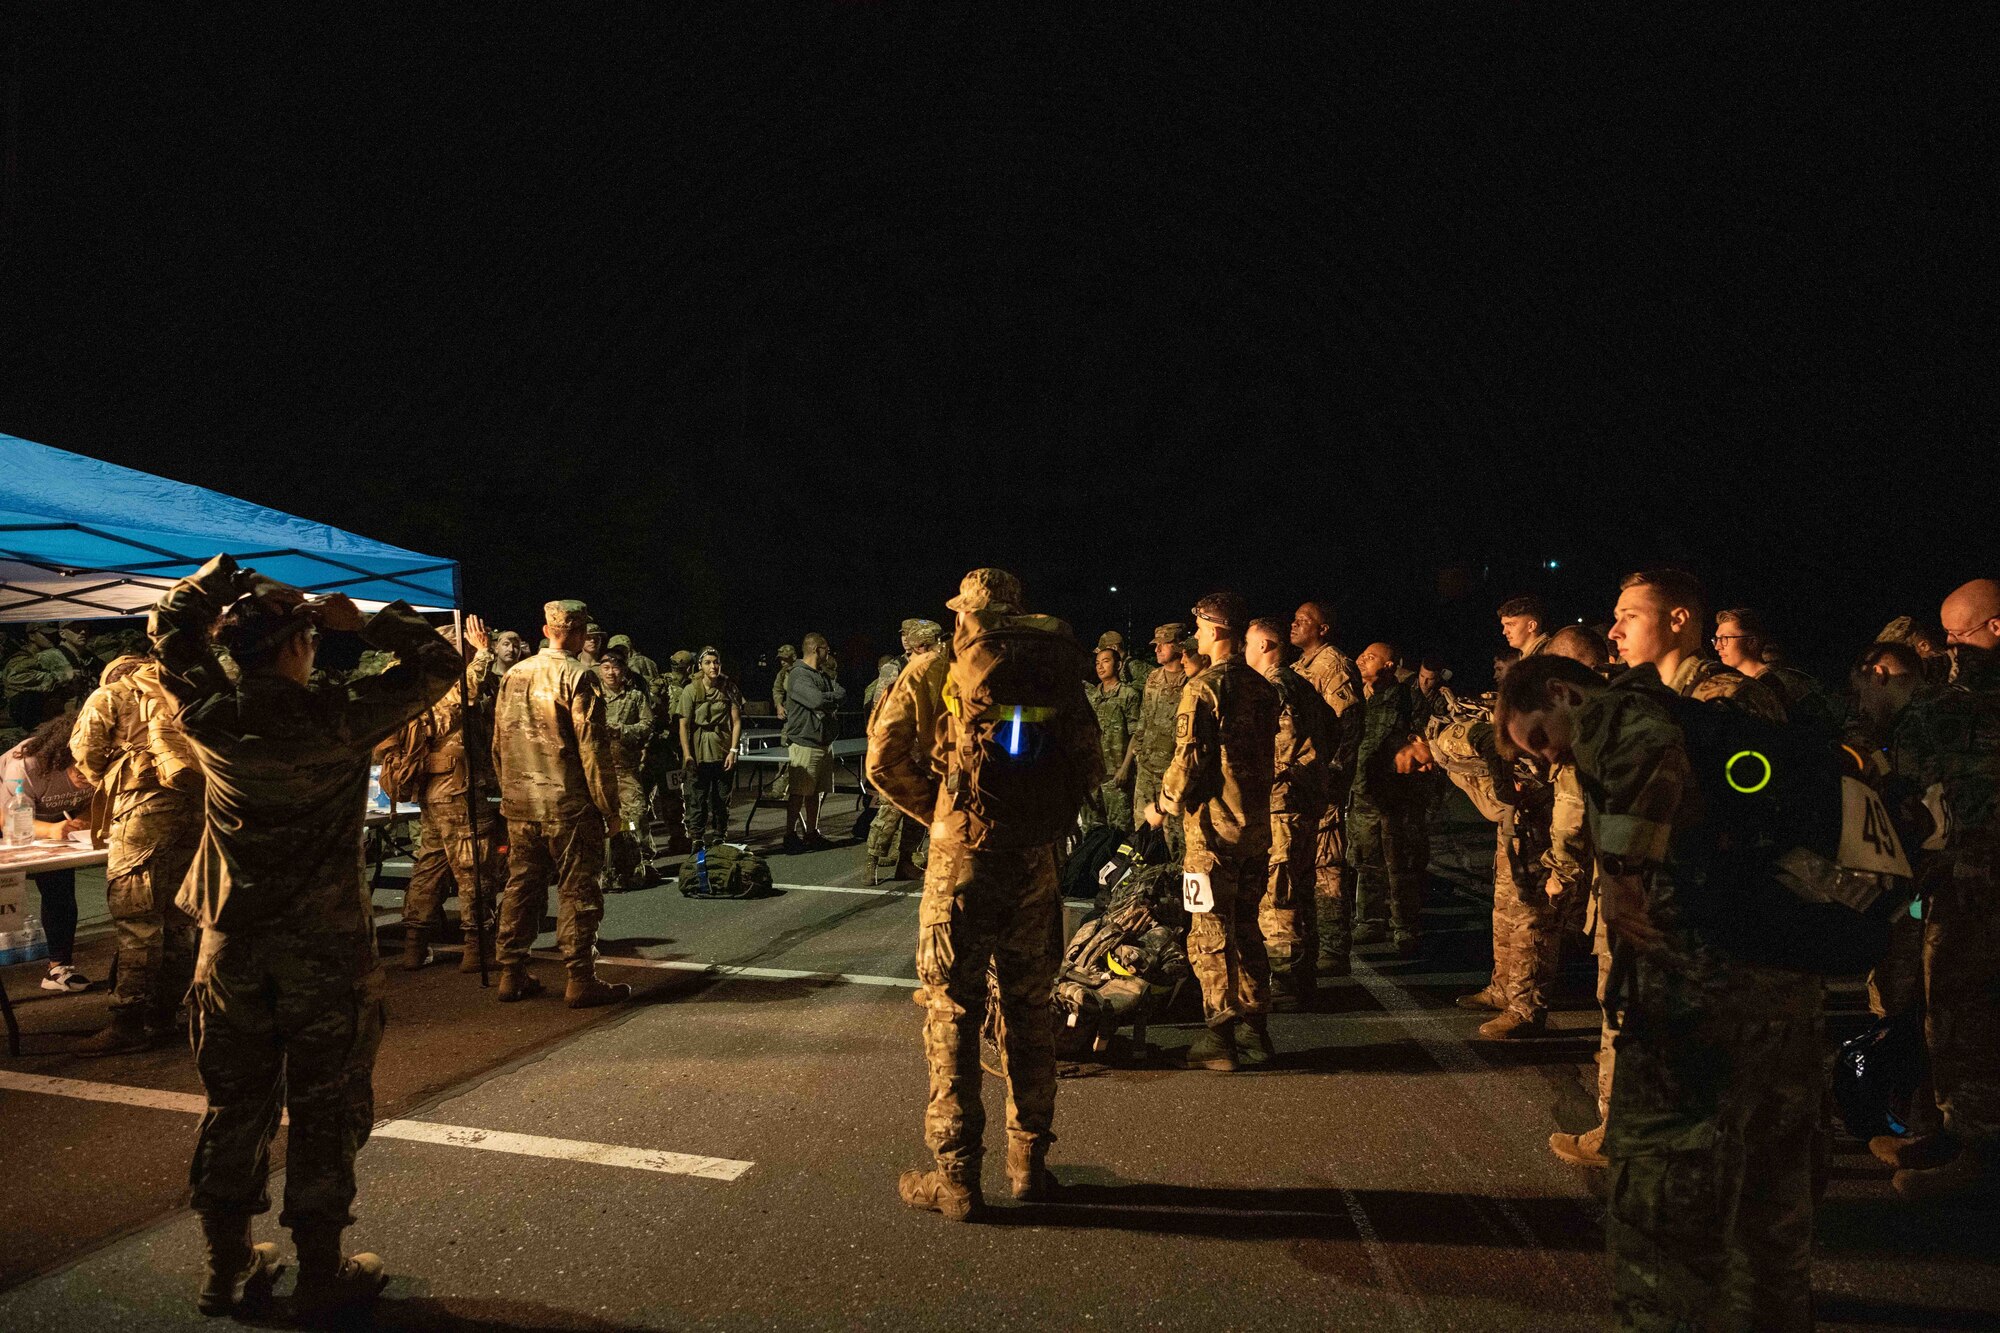 Members of Team Misawa listen to the back story and the importance of the Norwegian Foot March before starting the march at Misawa Air Base, Japan, June 25, 2022.